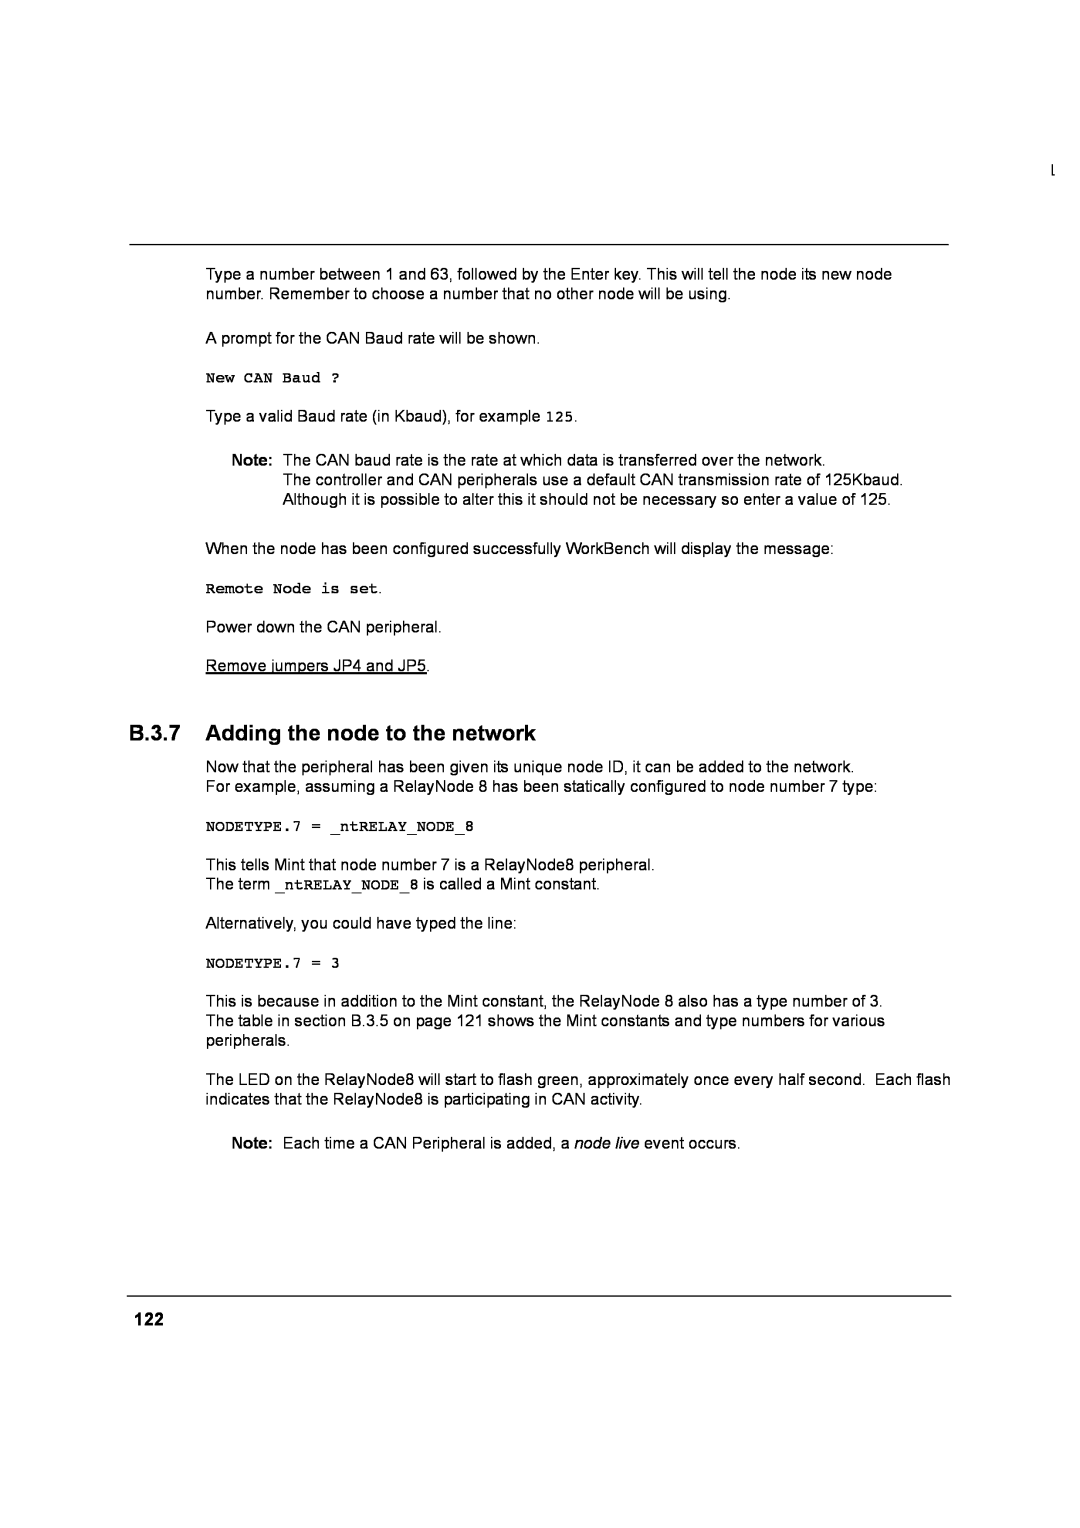 Baldor MN1274 06/2001 installation manual B.3.7 Adding the node to the network 